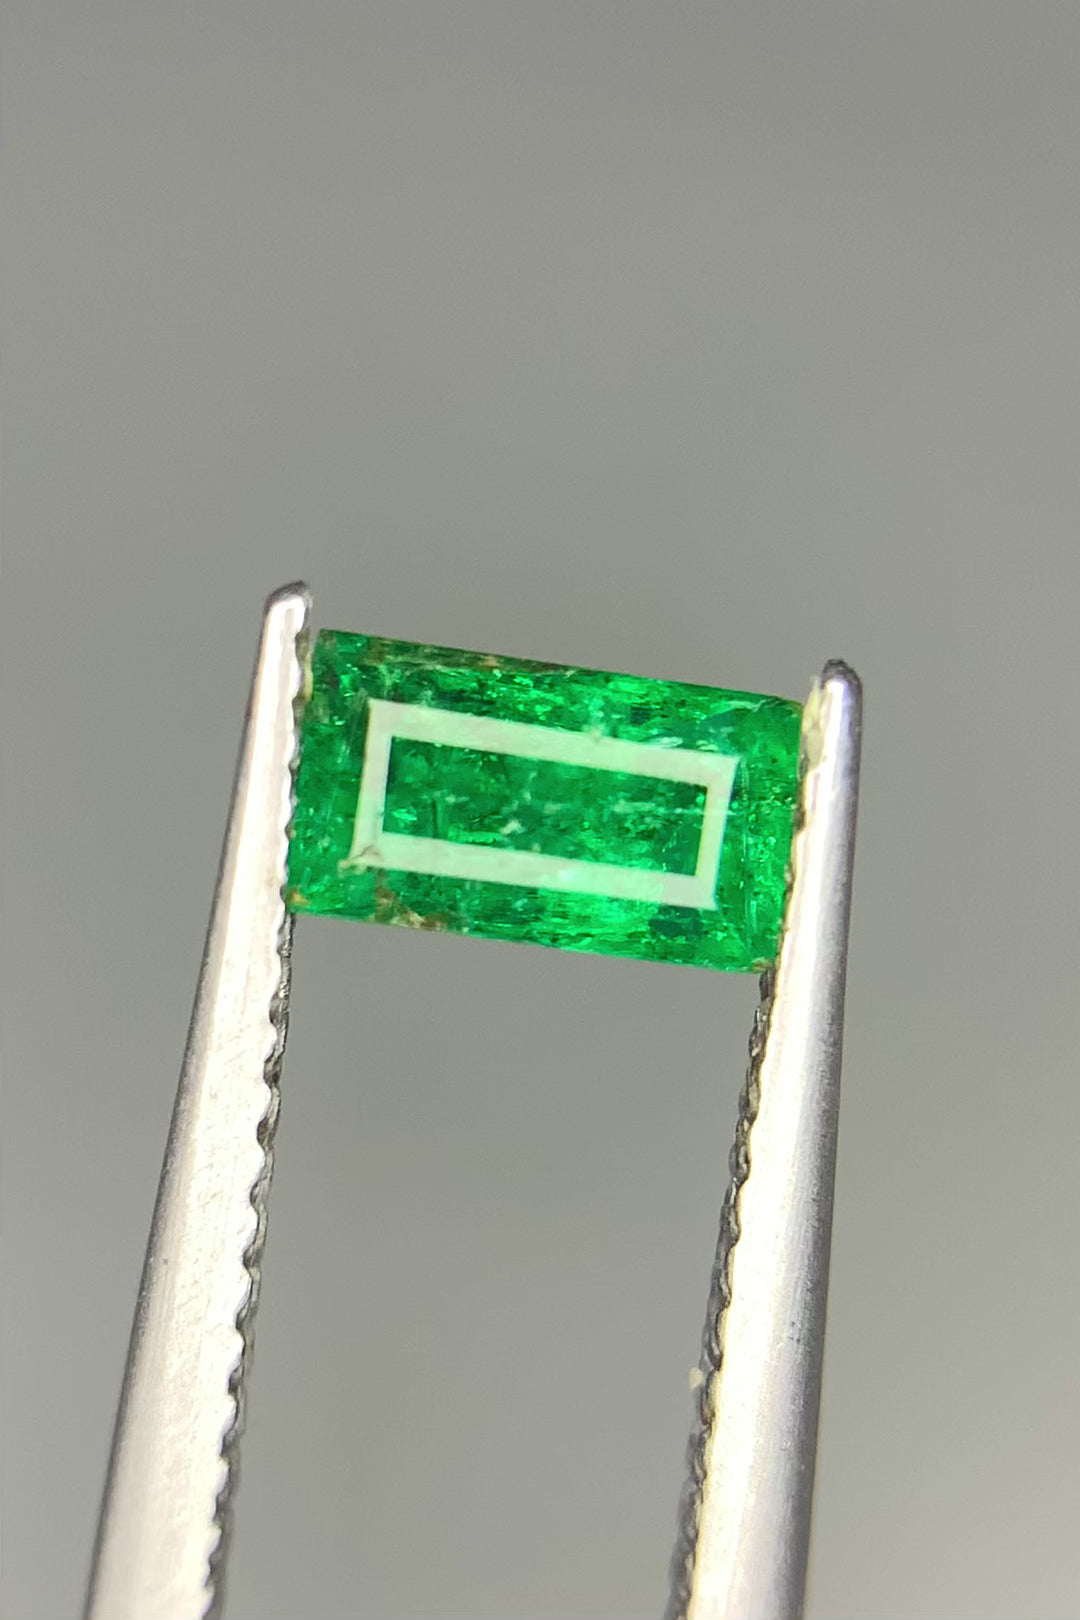 Natural Emerald Stone For Ring Making, Green Emerald Gem From Afghanistan